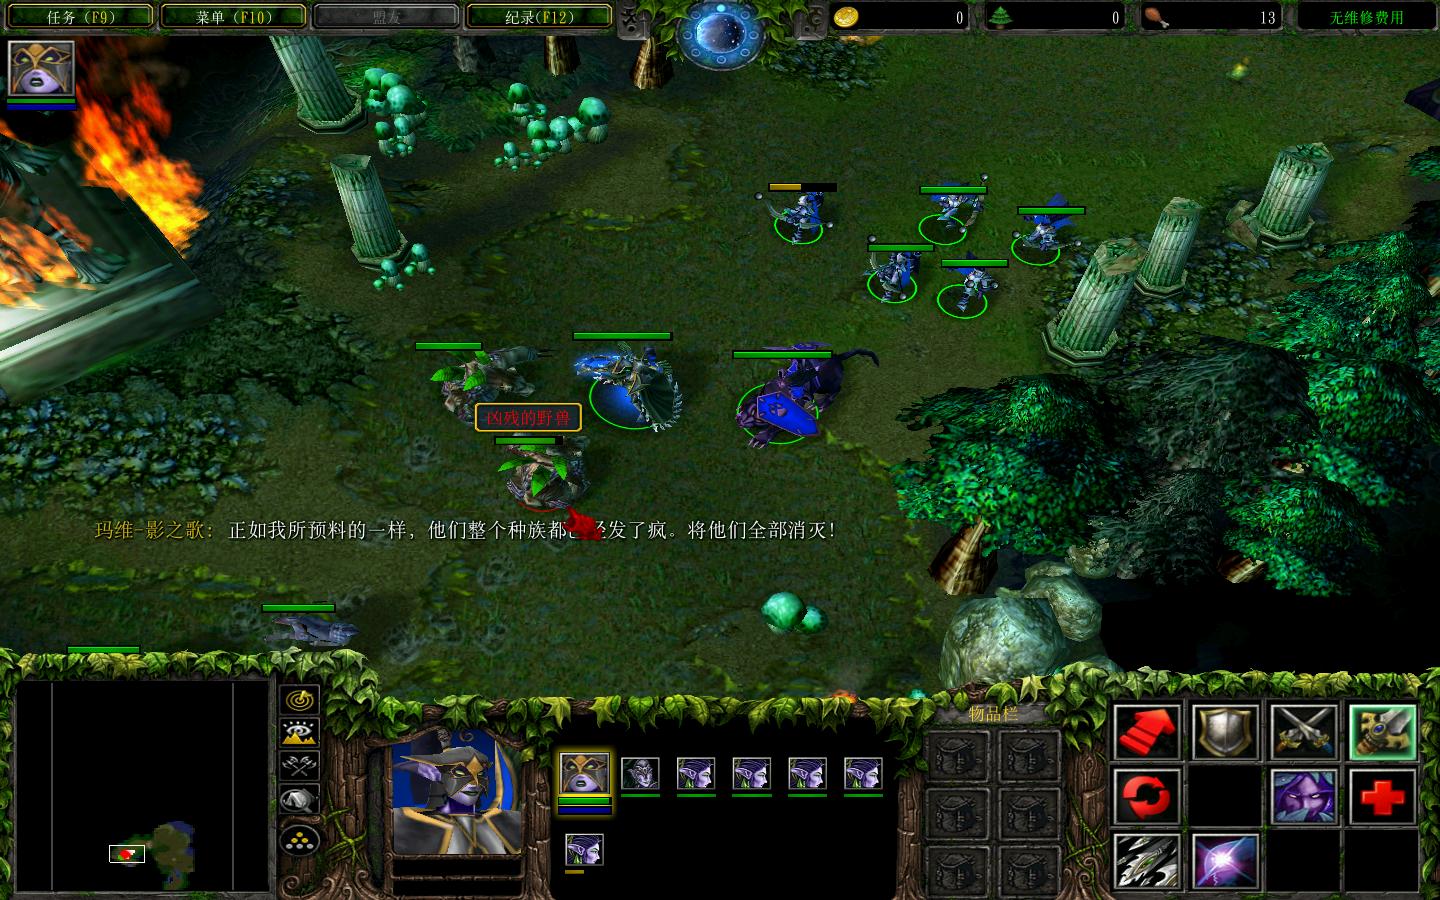 ħ3Warcraft III The Frozen Thronev1.26˪֮ v1.03ʽ